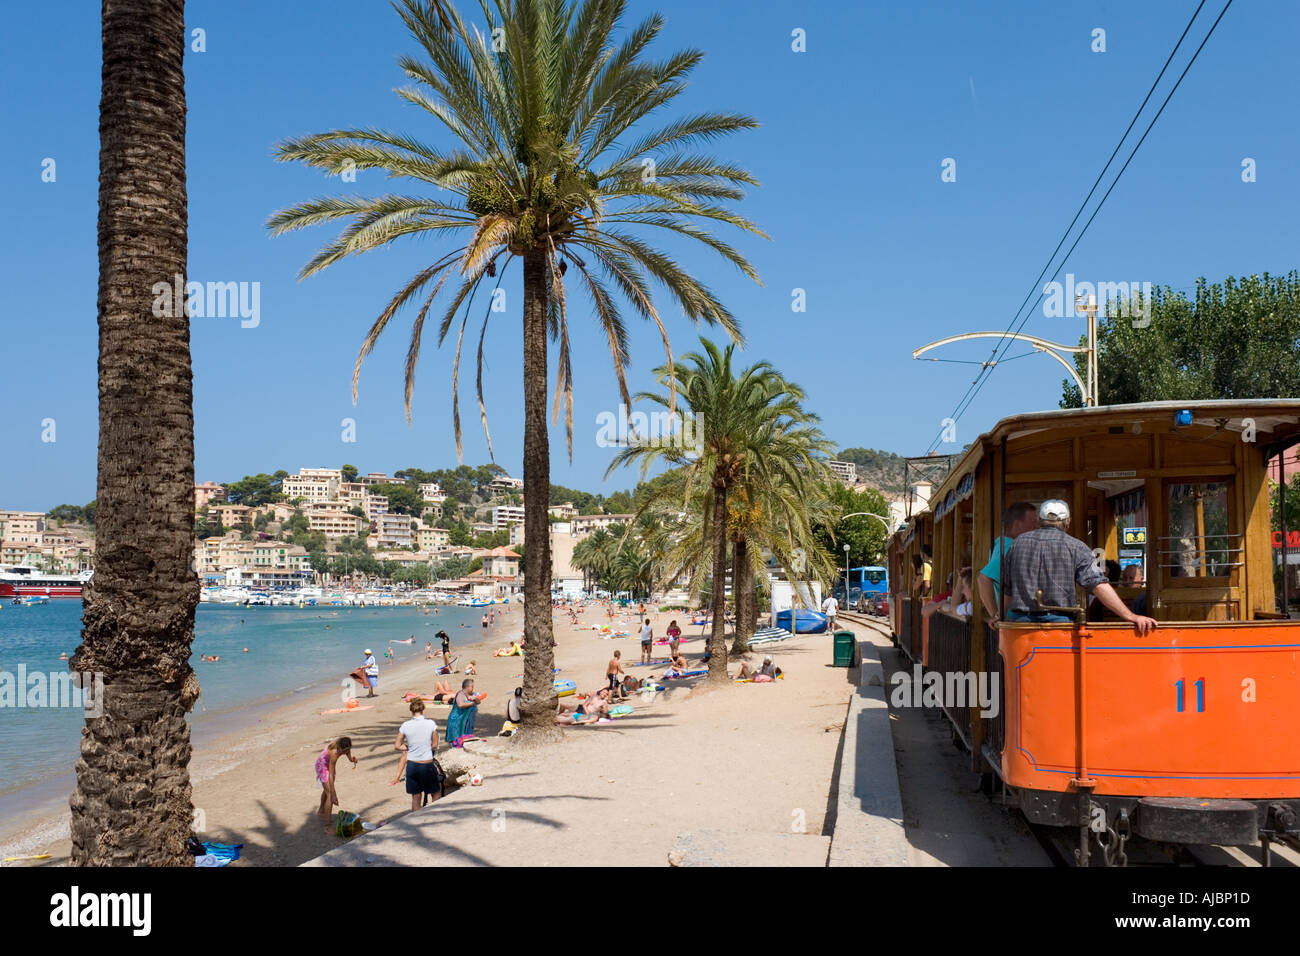 Tram on the seafront at Port de Soller (Puerto Soller), West Coast, Mallorca, Spain Stock Photo